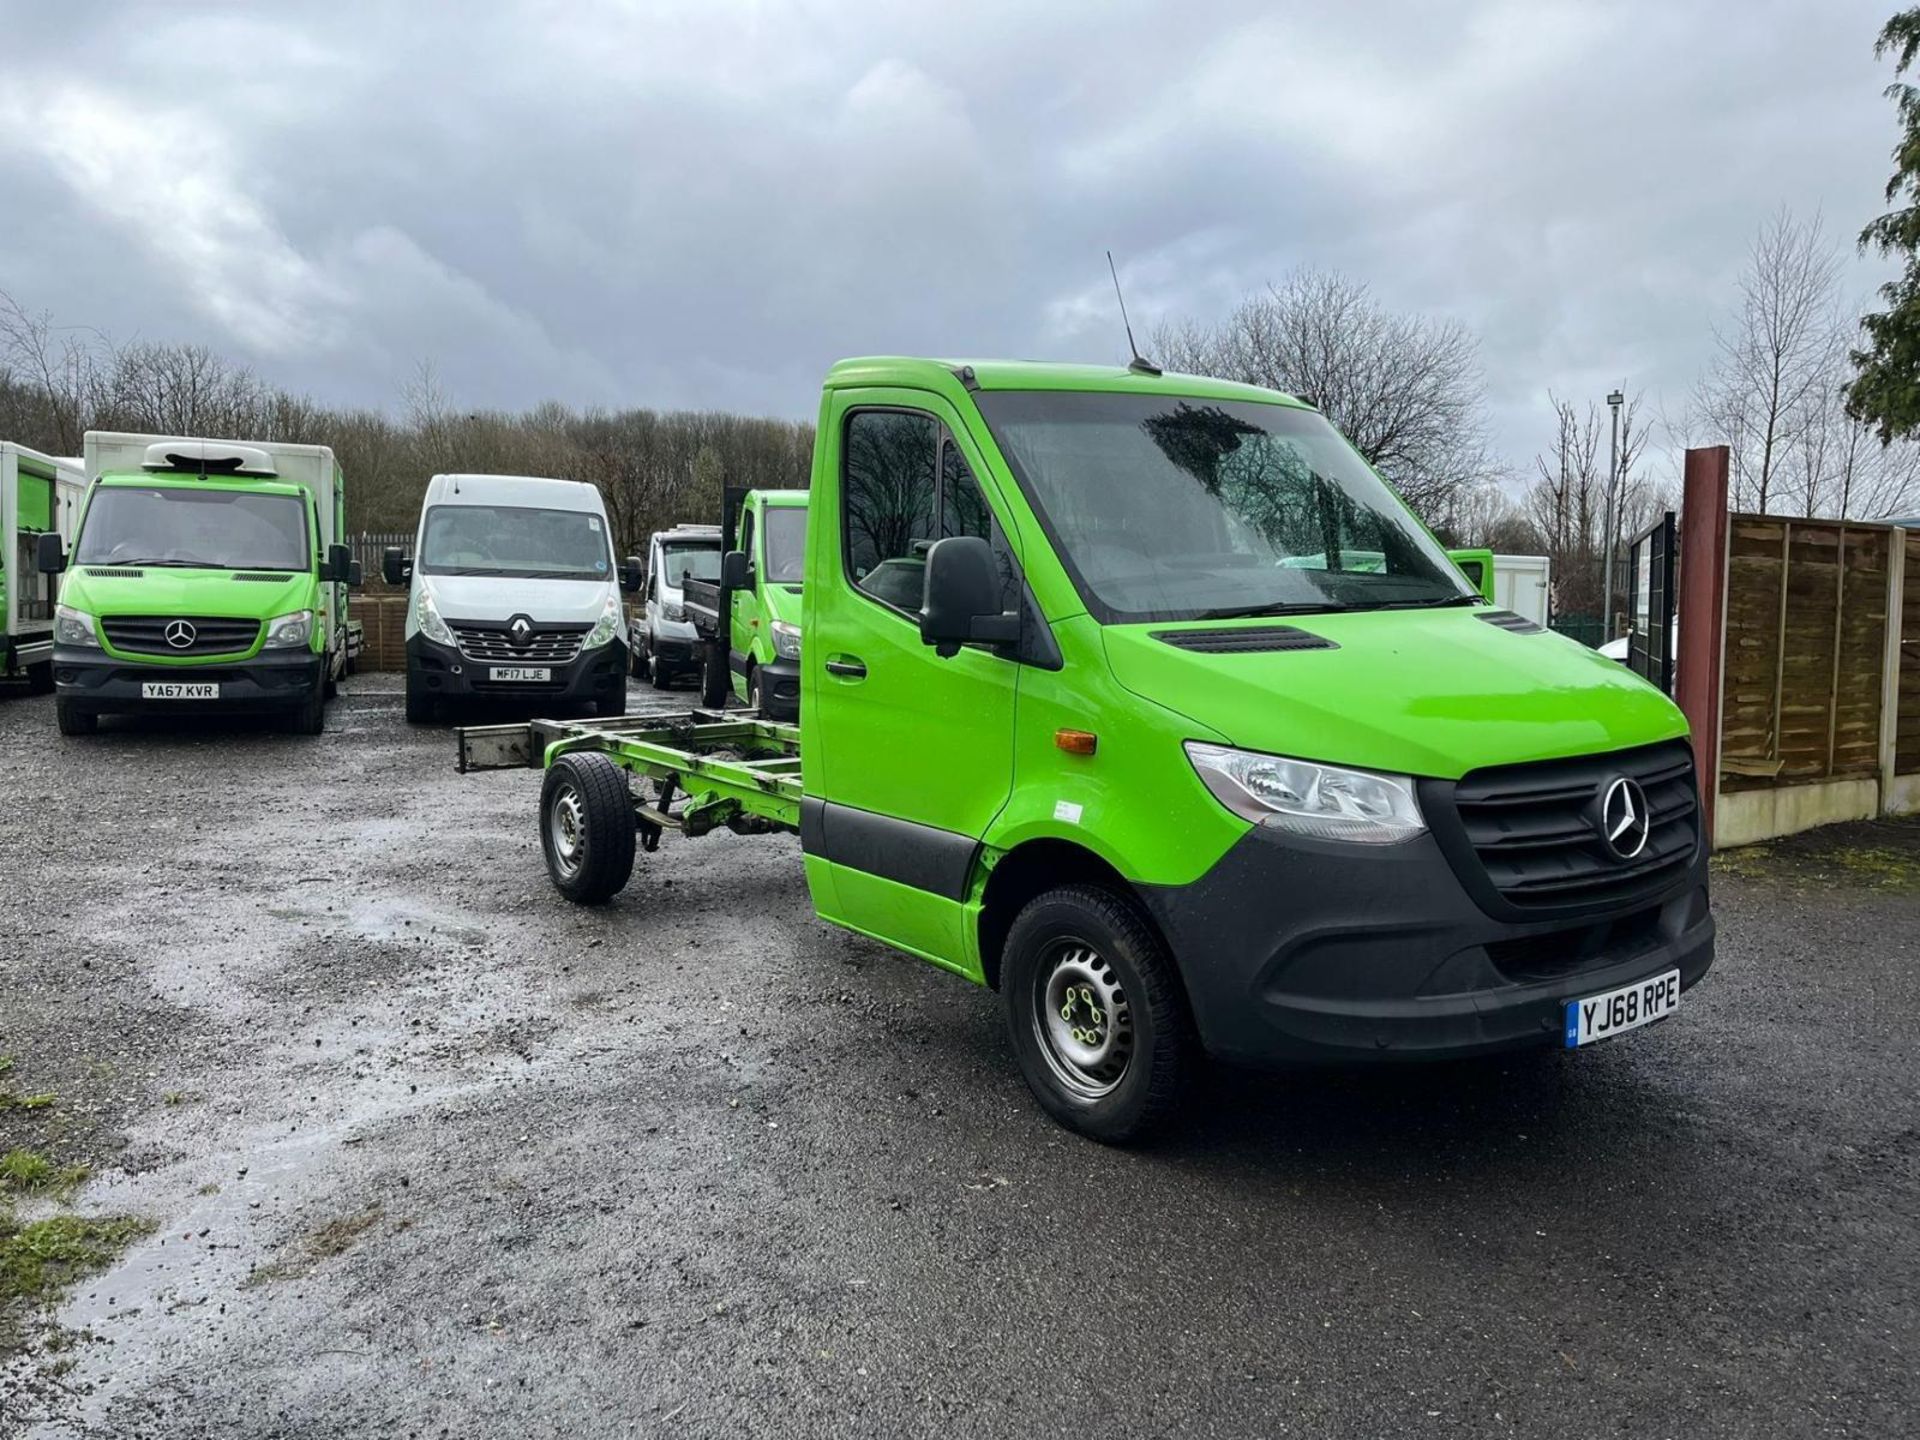 >>>SPECIAL CLEARANCE<<< SMOOTH OPERATOR: 2019 MERCEDES SPRINTER 314 CDI - RELIABLE FLEET VEHICLE